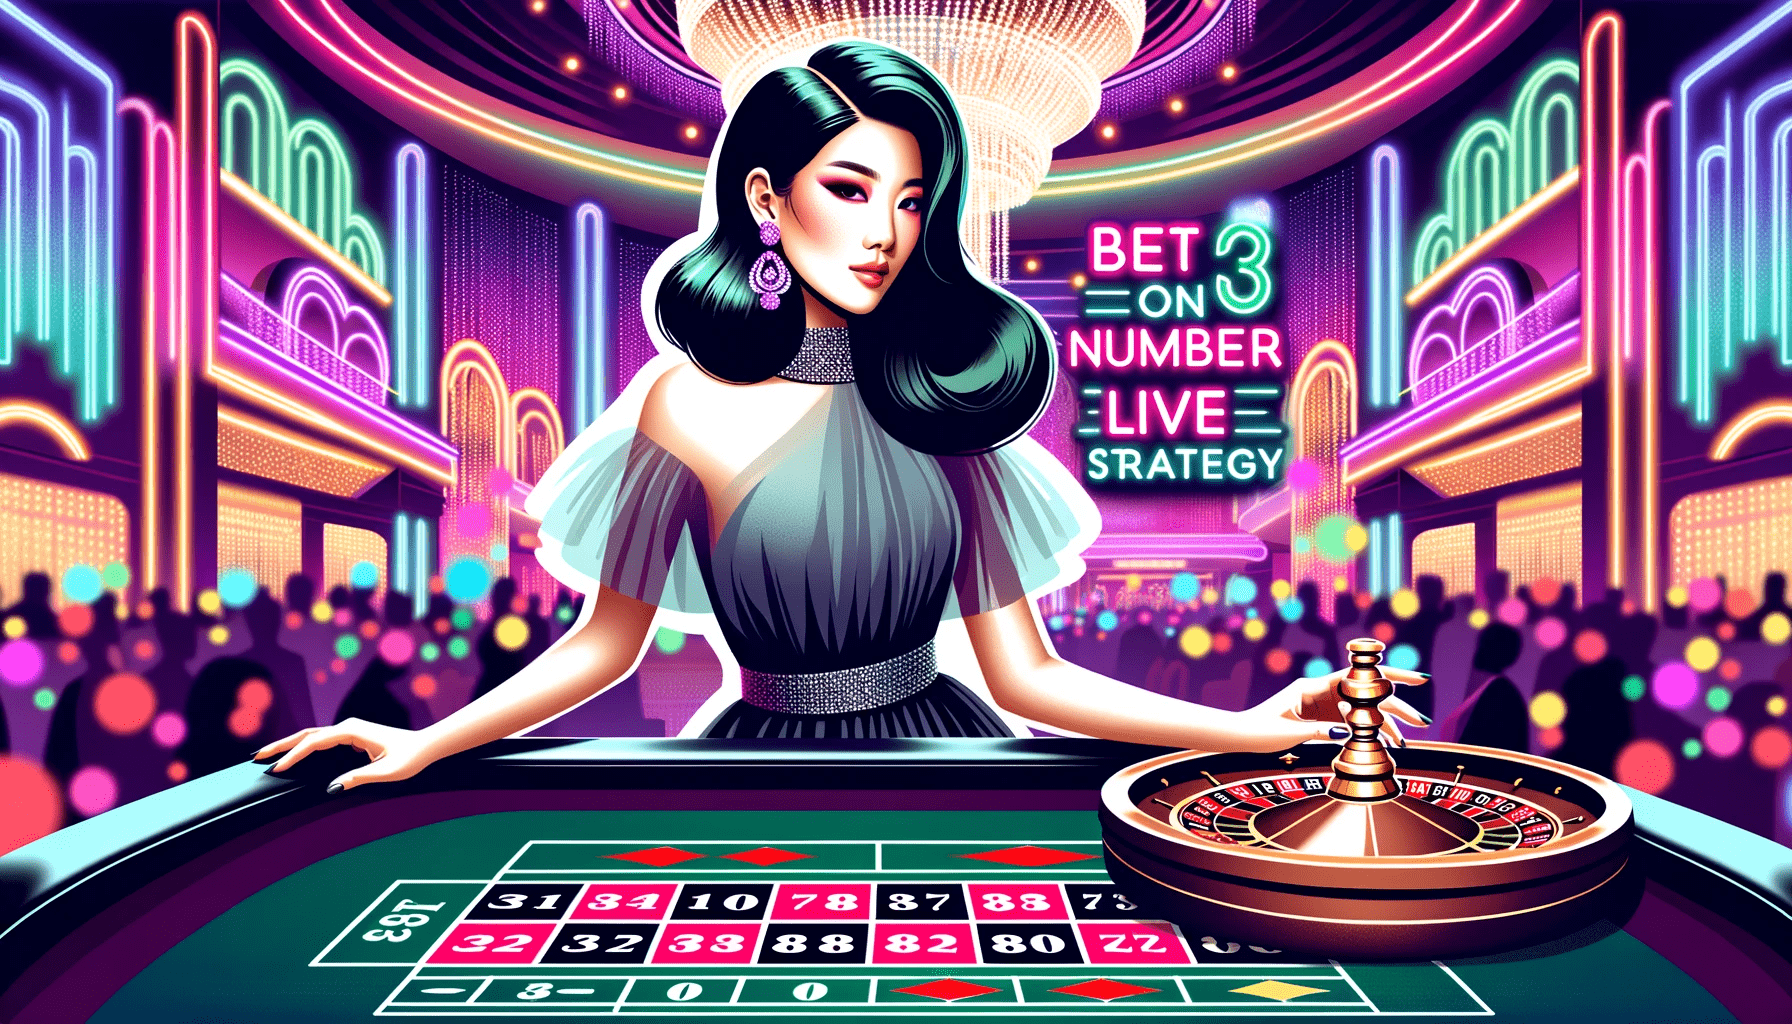 Bet on Number Live Strategy